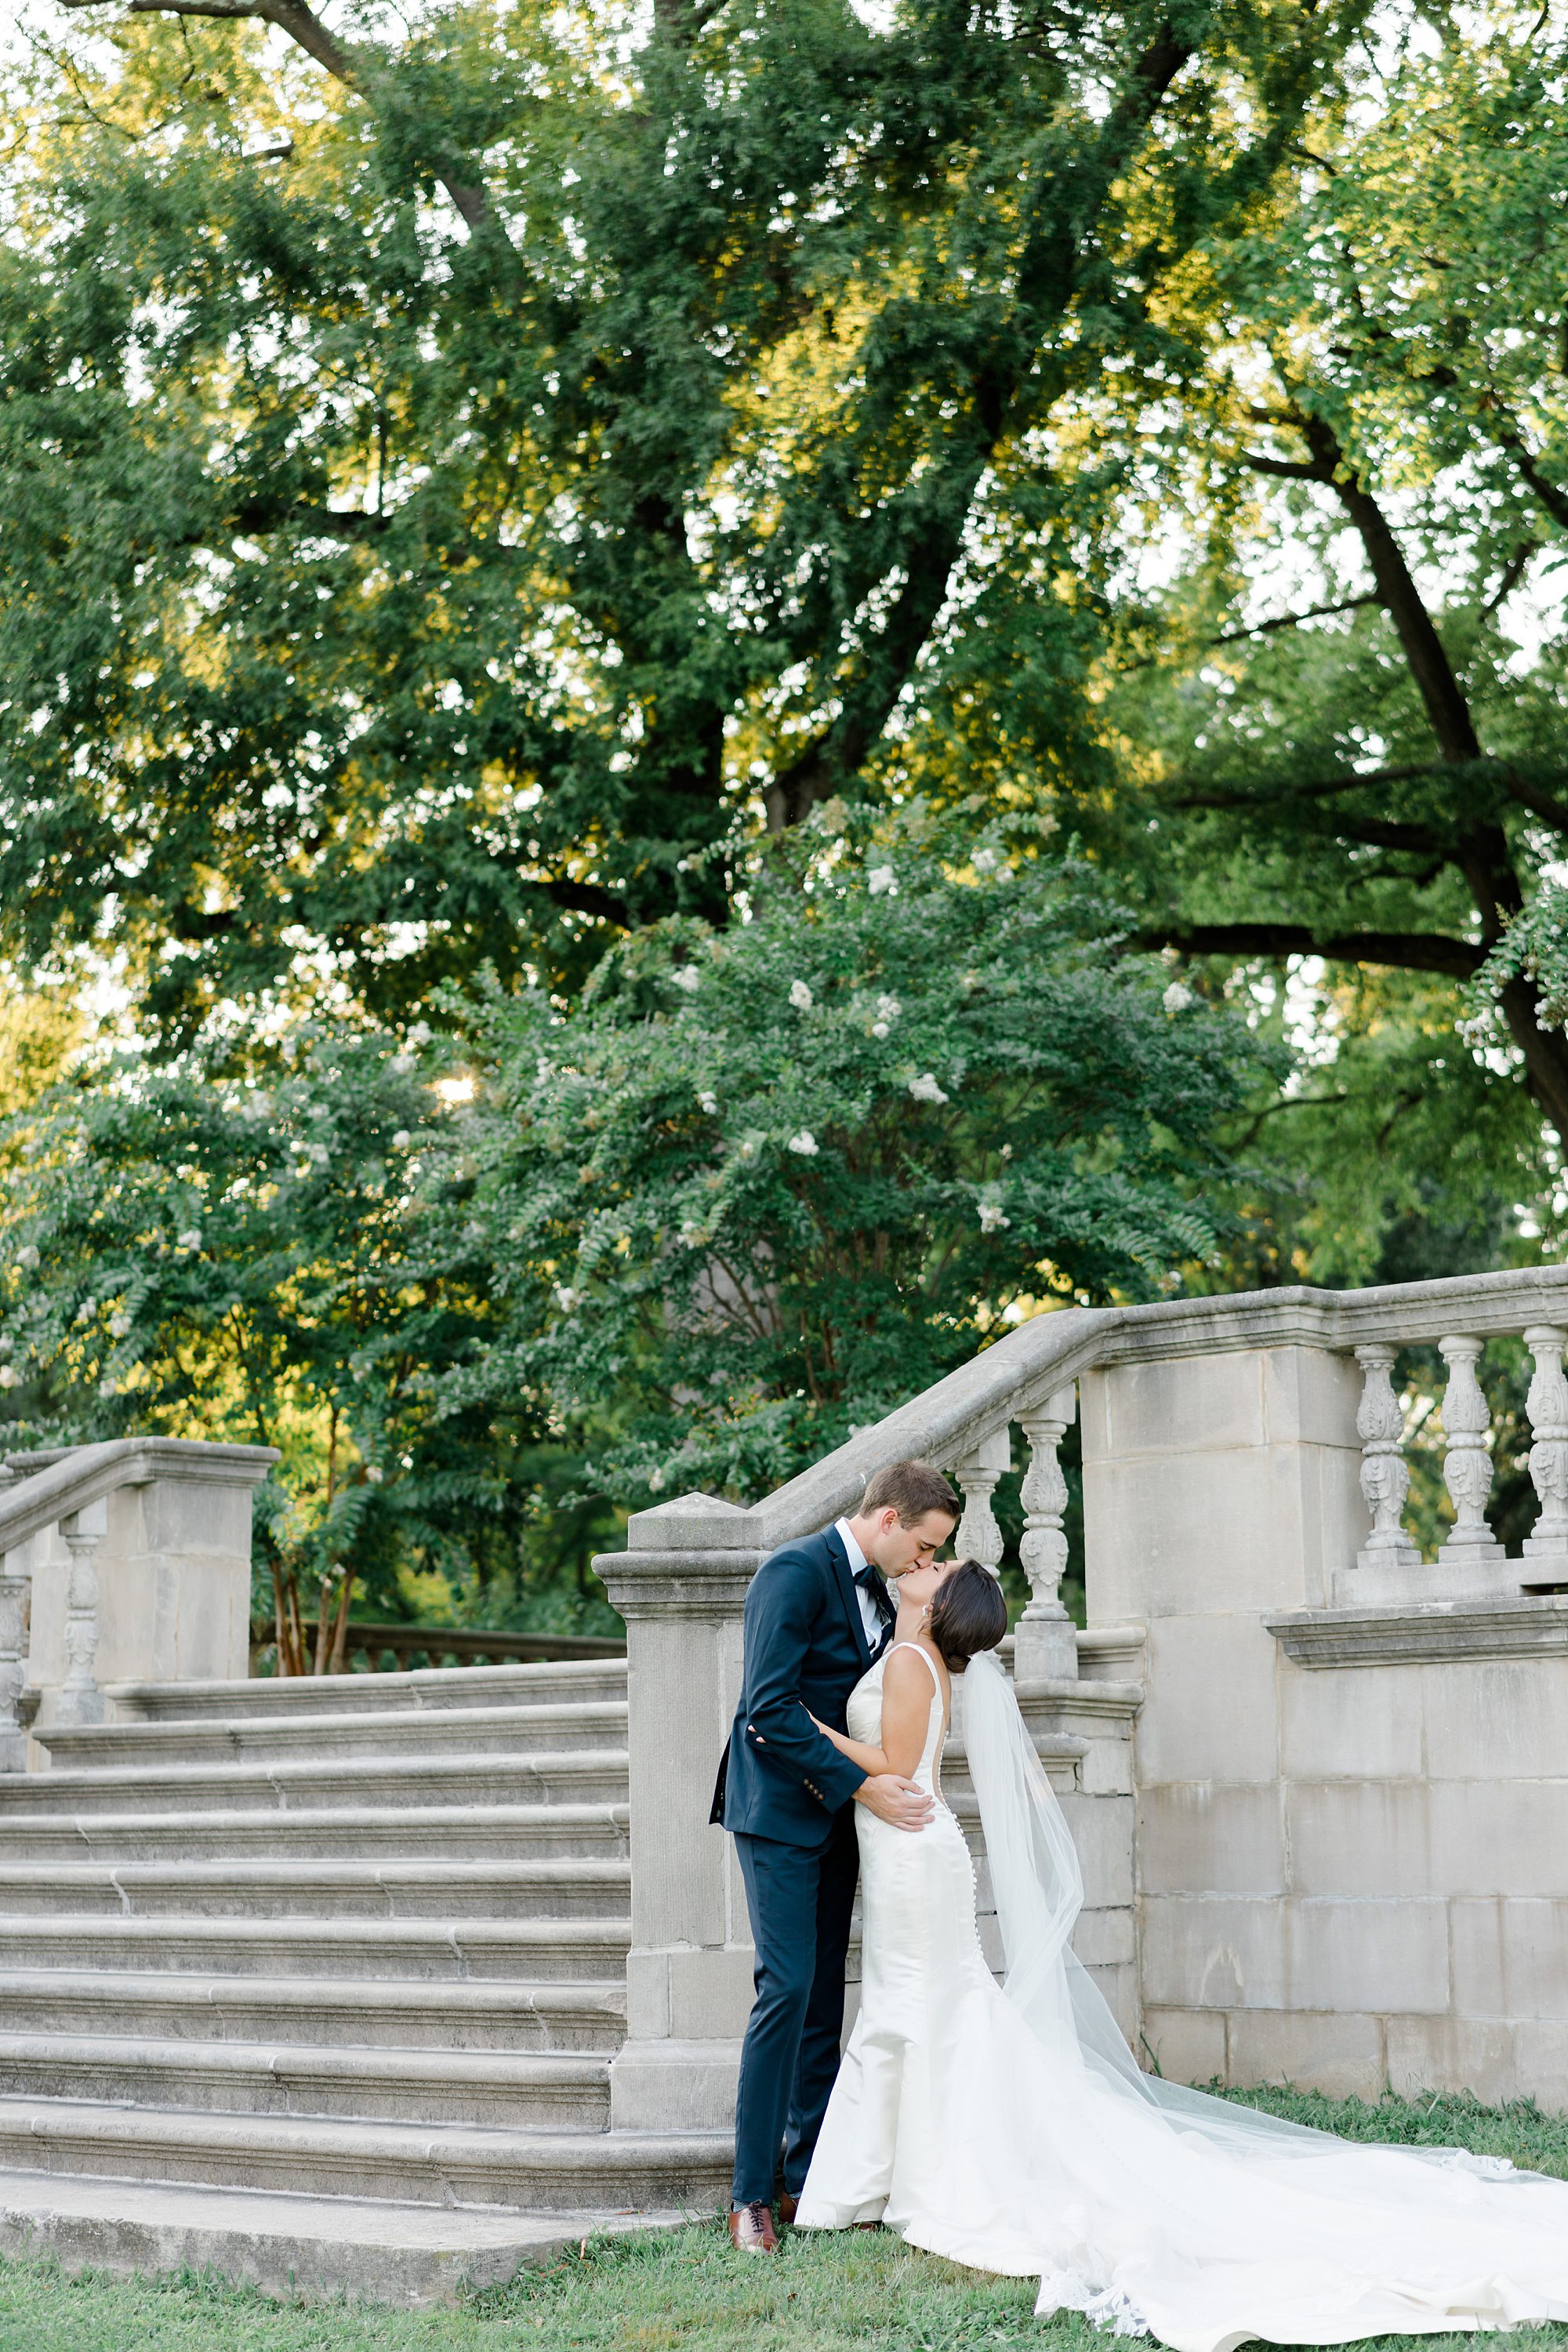 couple kiss at the bottom of stairs after wedding ceremony